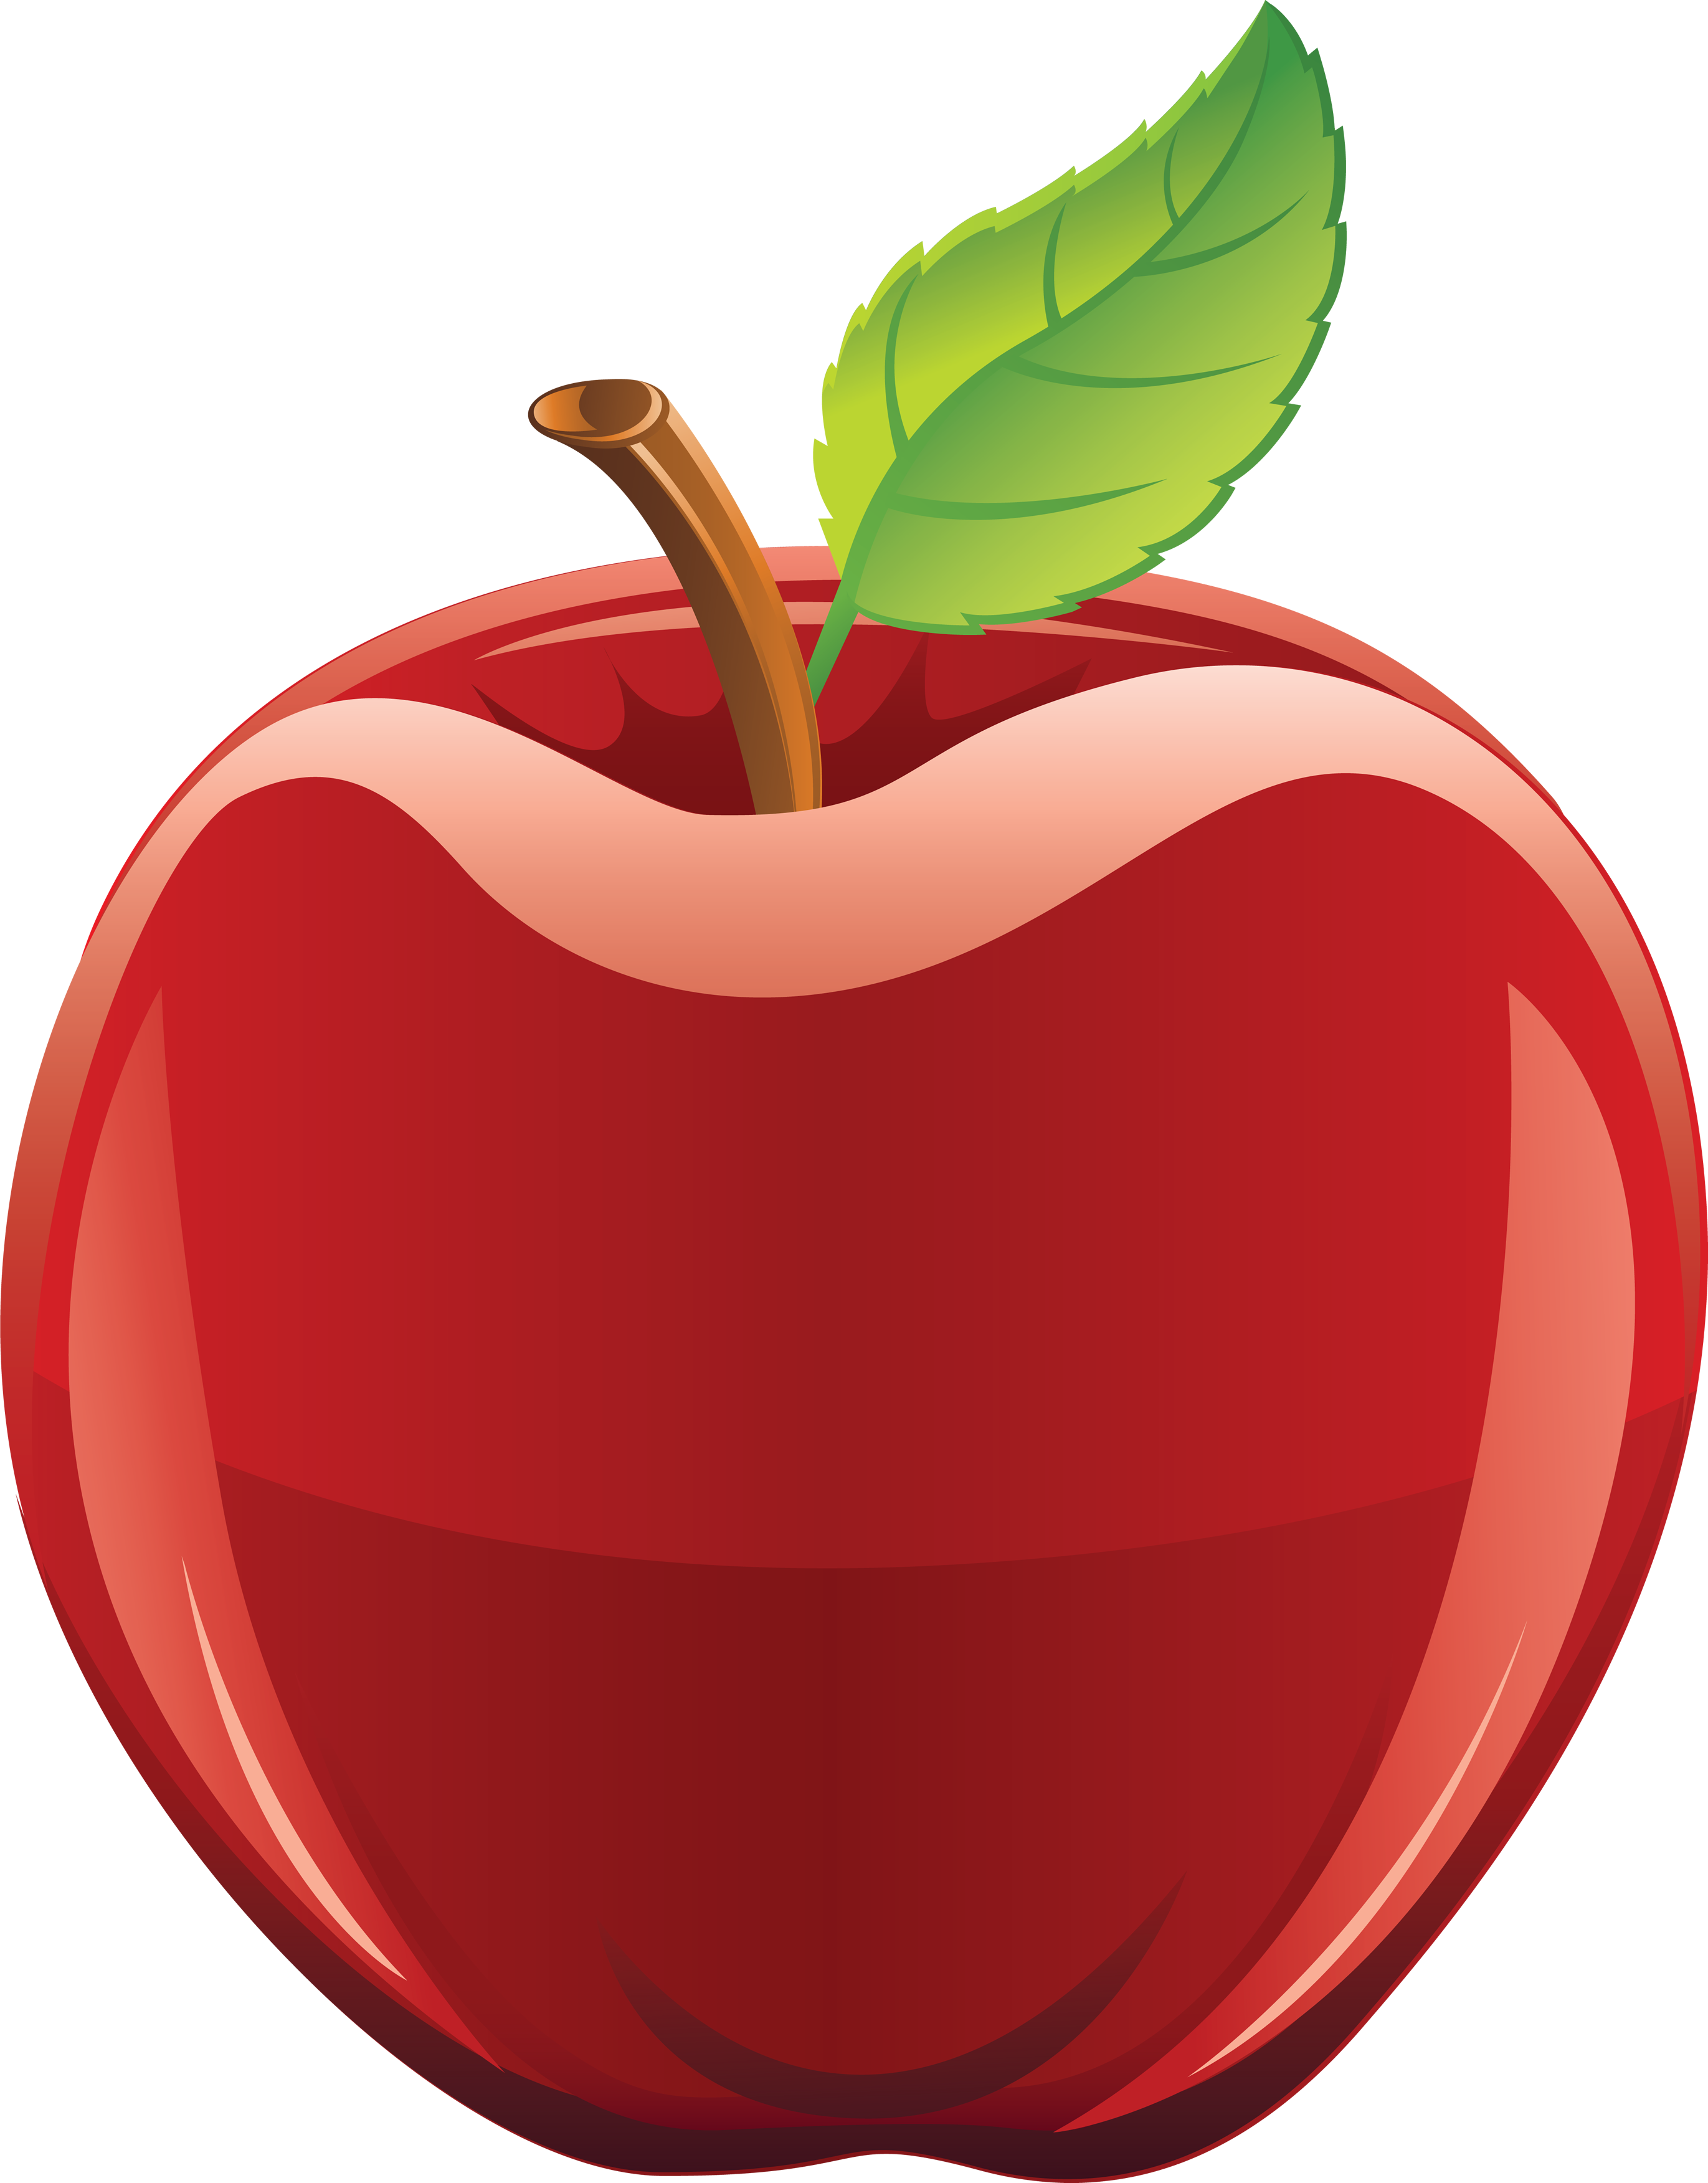 Apple PNG image free download, apple PNG 